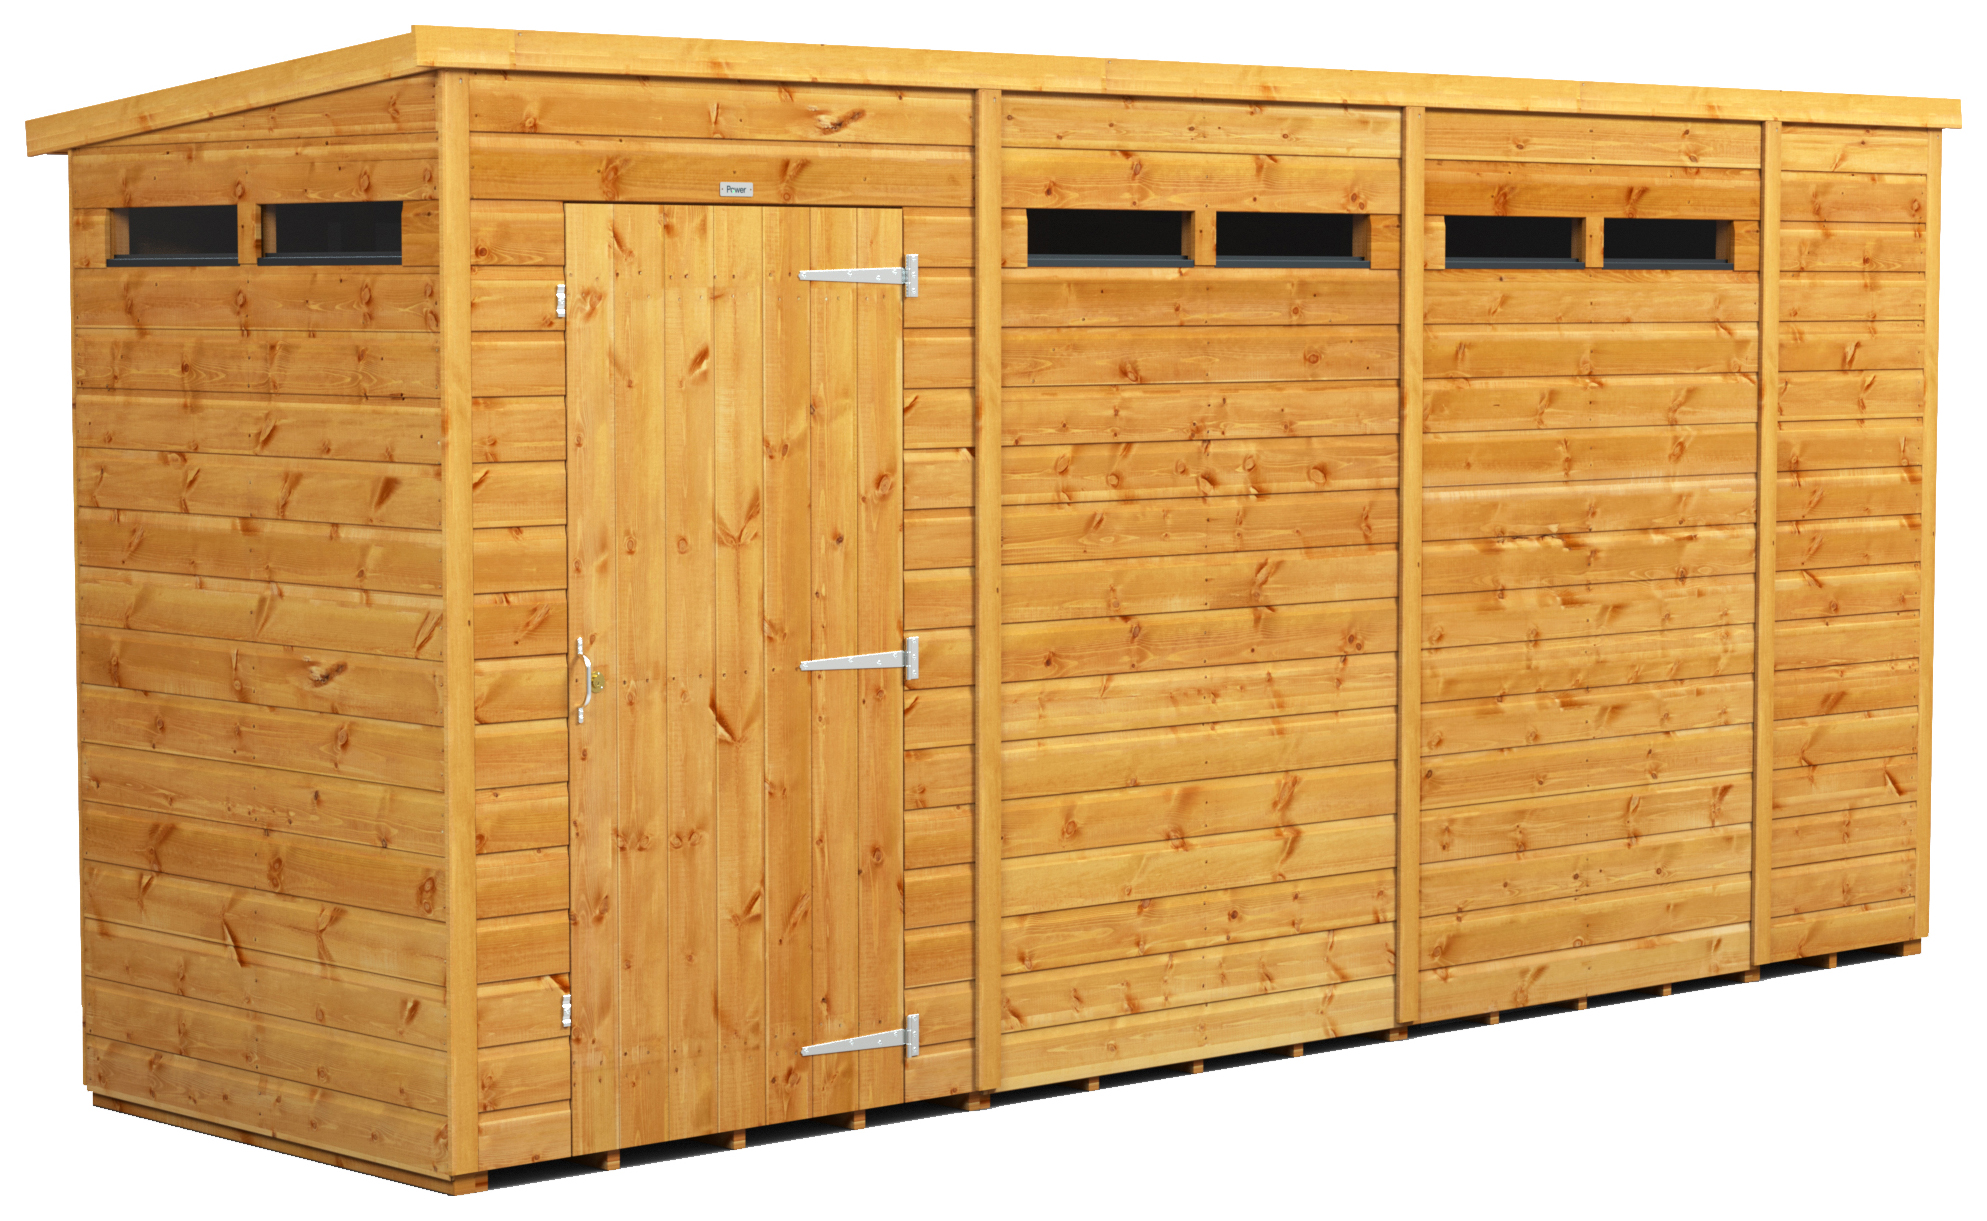 Power Sheds 14 x 4ft Pent Shiplap Dip Treated Security Shed